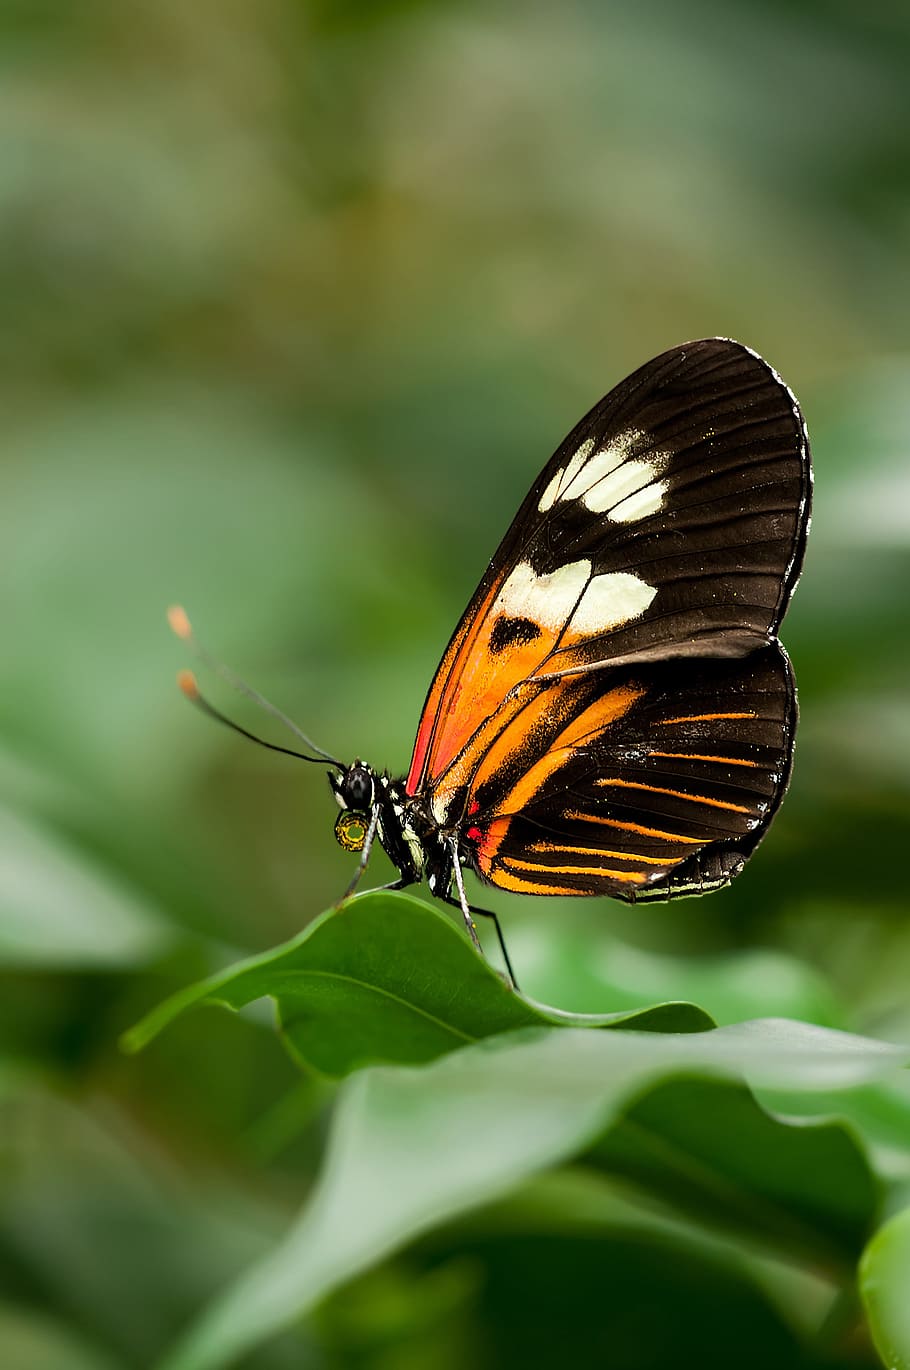 black and brown butterfly perched on green leaf in closeup photo, HD wallpaper